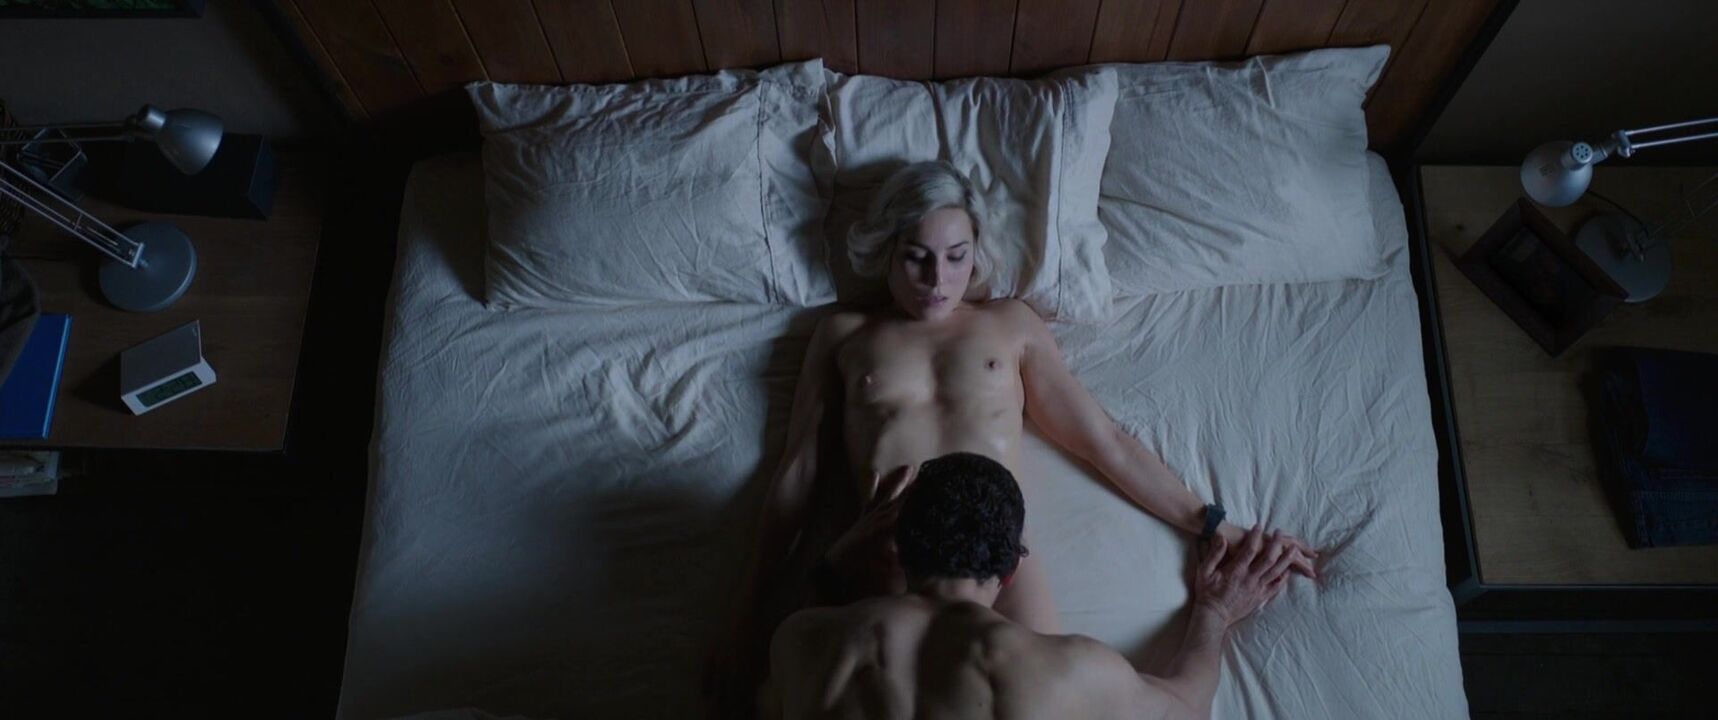 Noomi rapace sex scene in what happened to monday